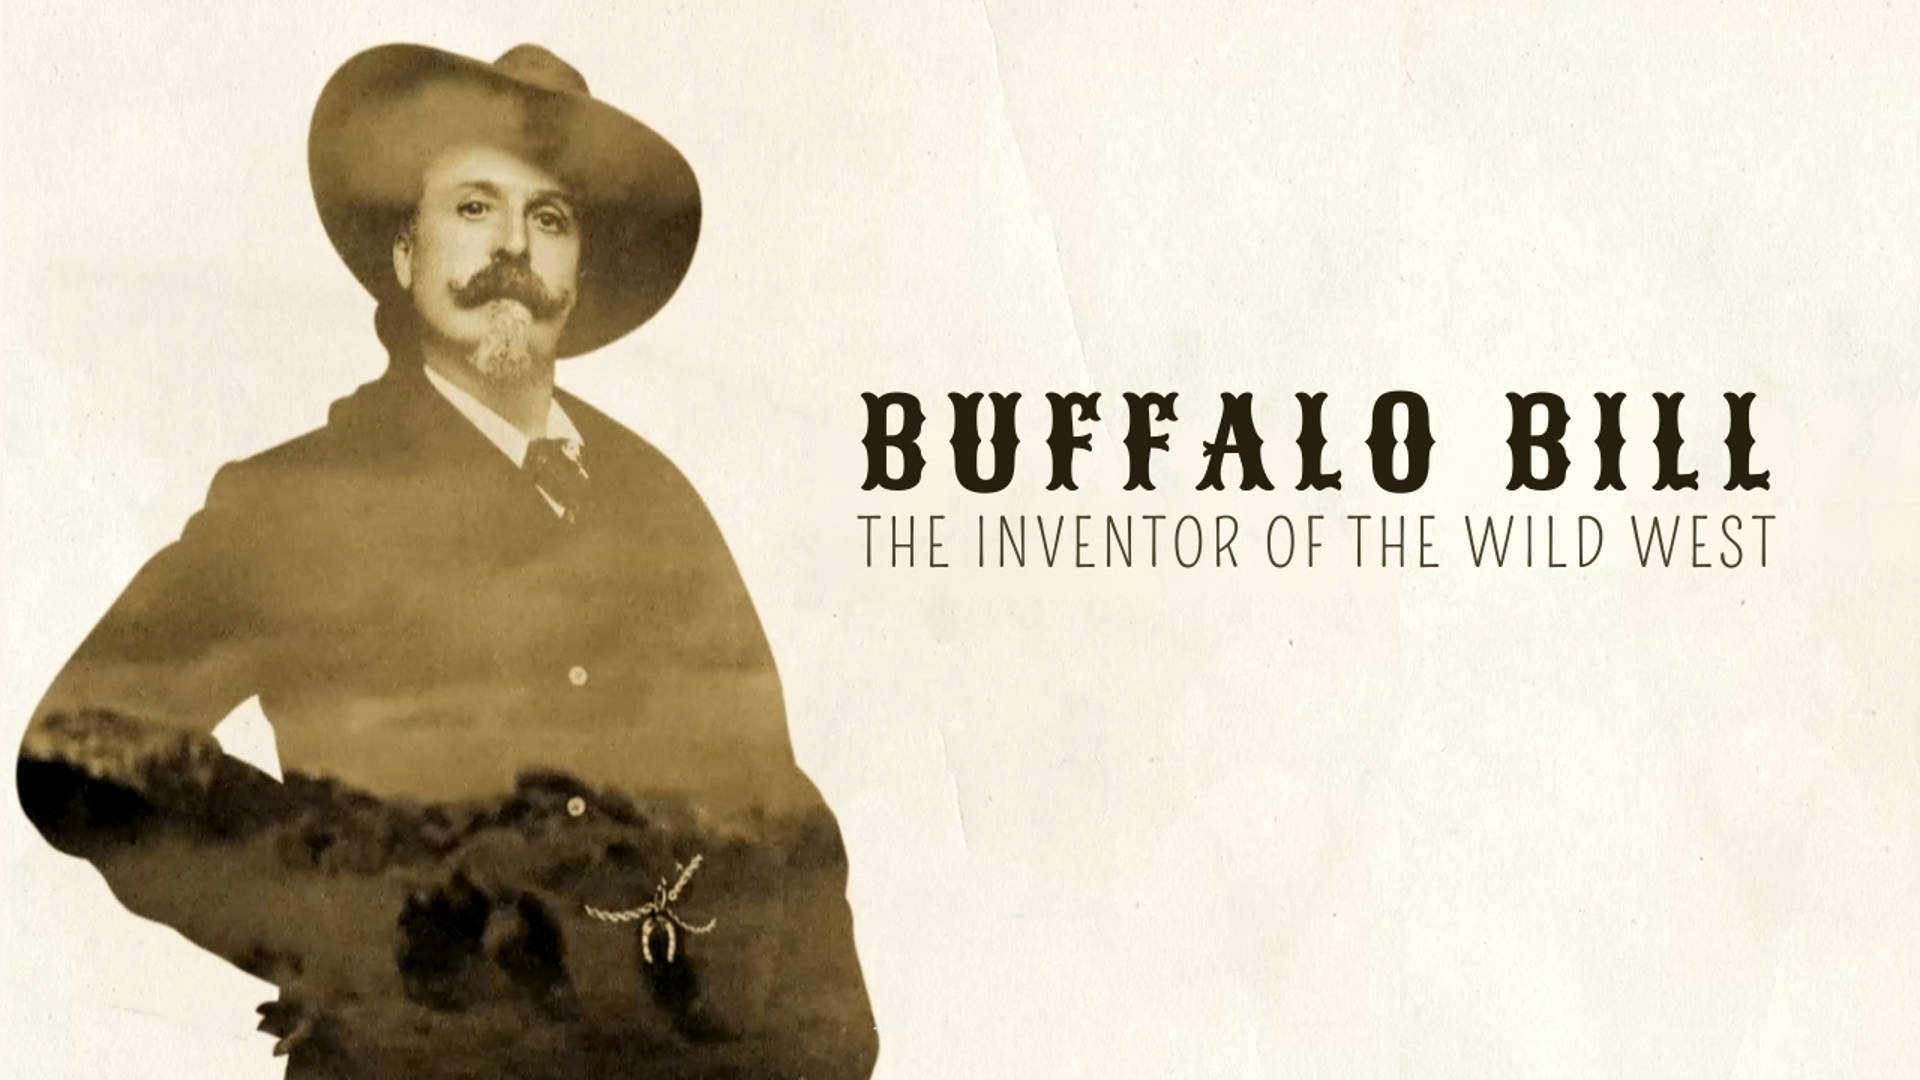 Buffalo Bill - The Inventor of the Wild West